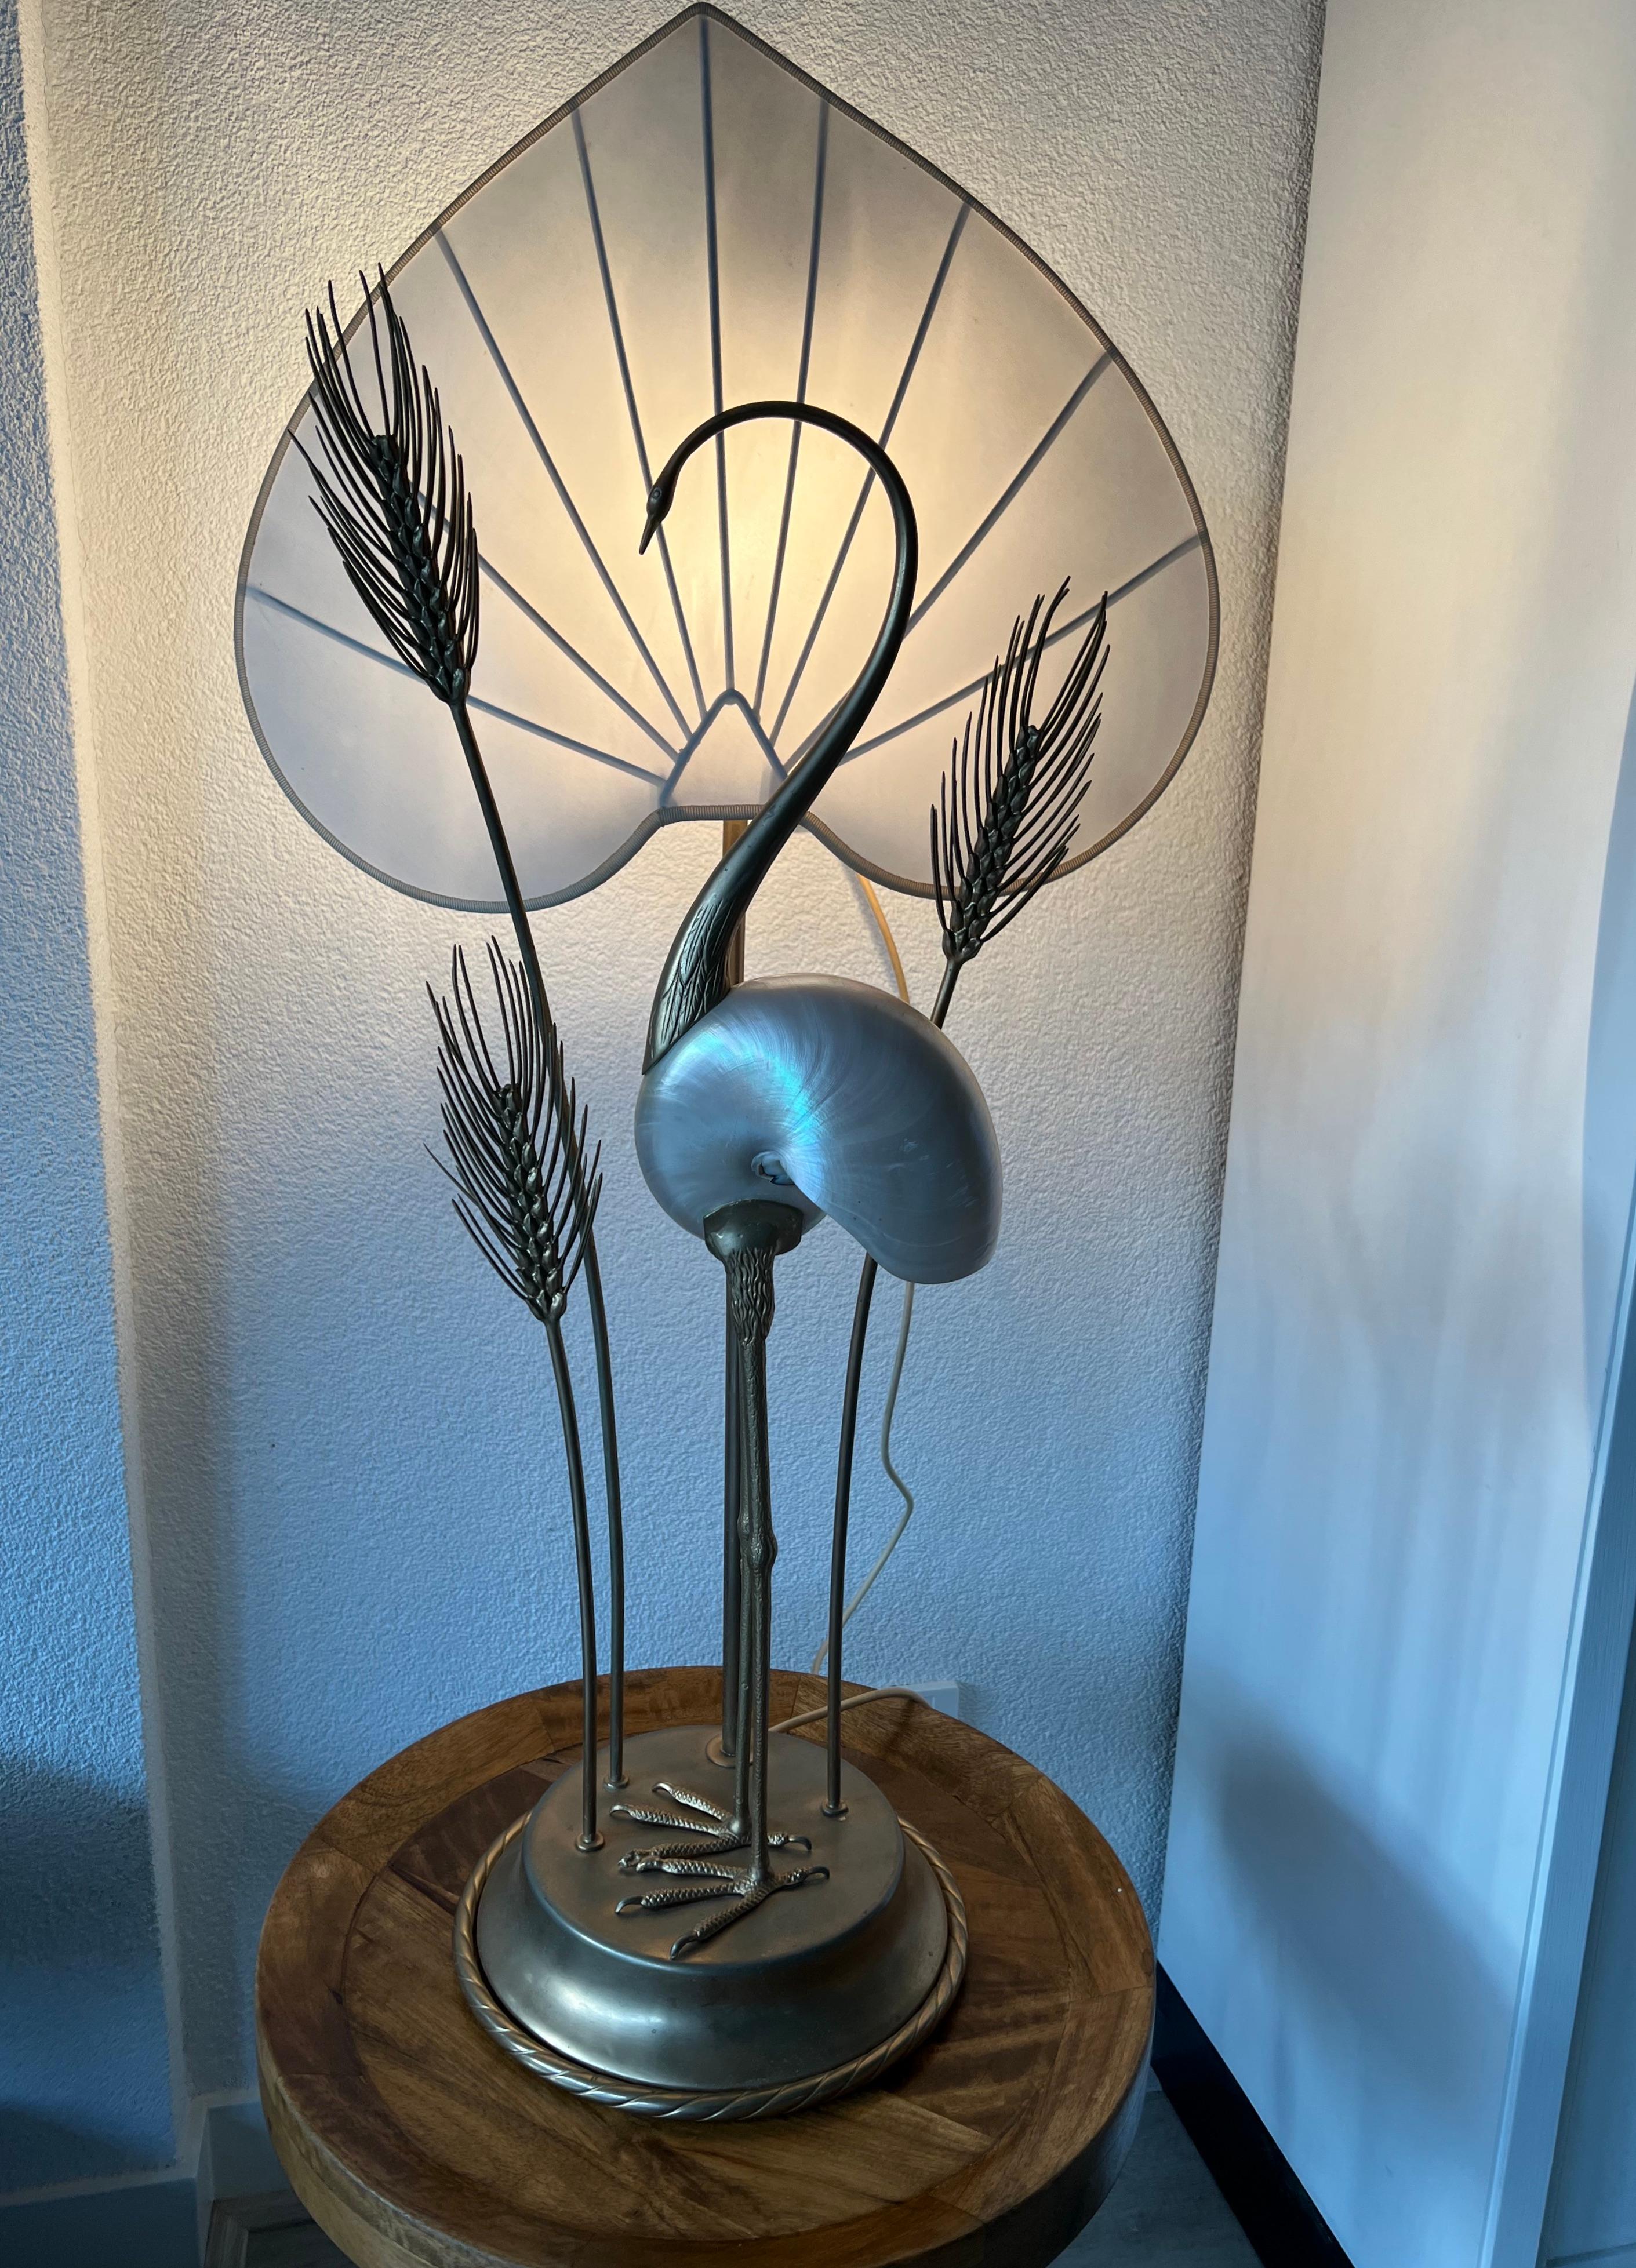 Stunning Italian Design Midcentury Modern Antonio Pavia Crane Table Lamp In Excellent Condition For Sale In Lisse, NL